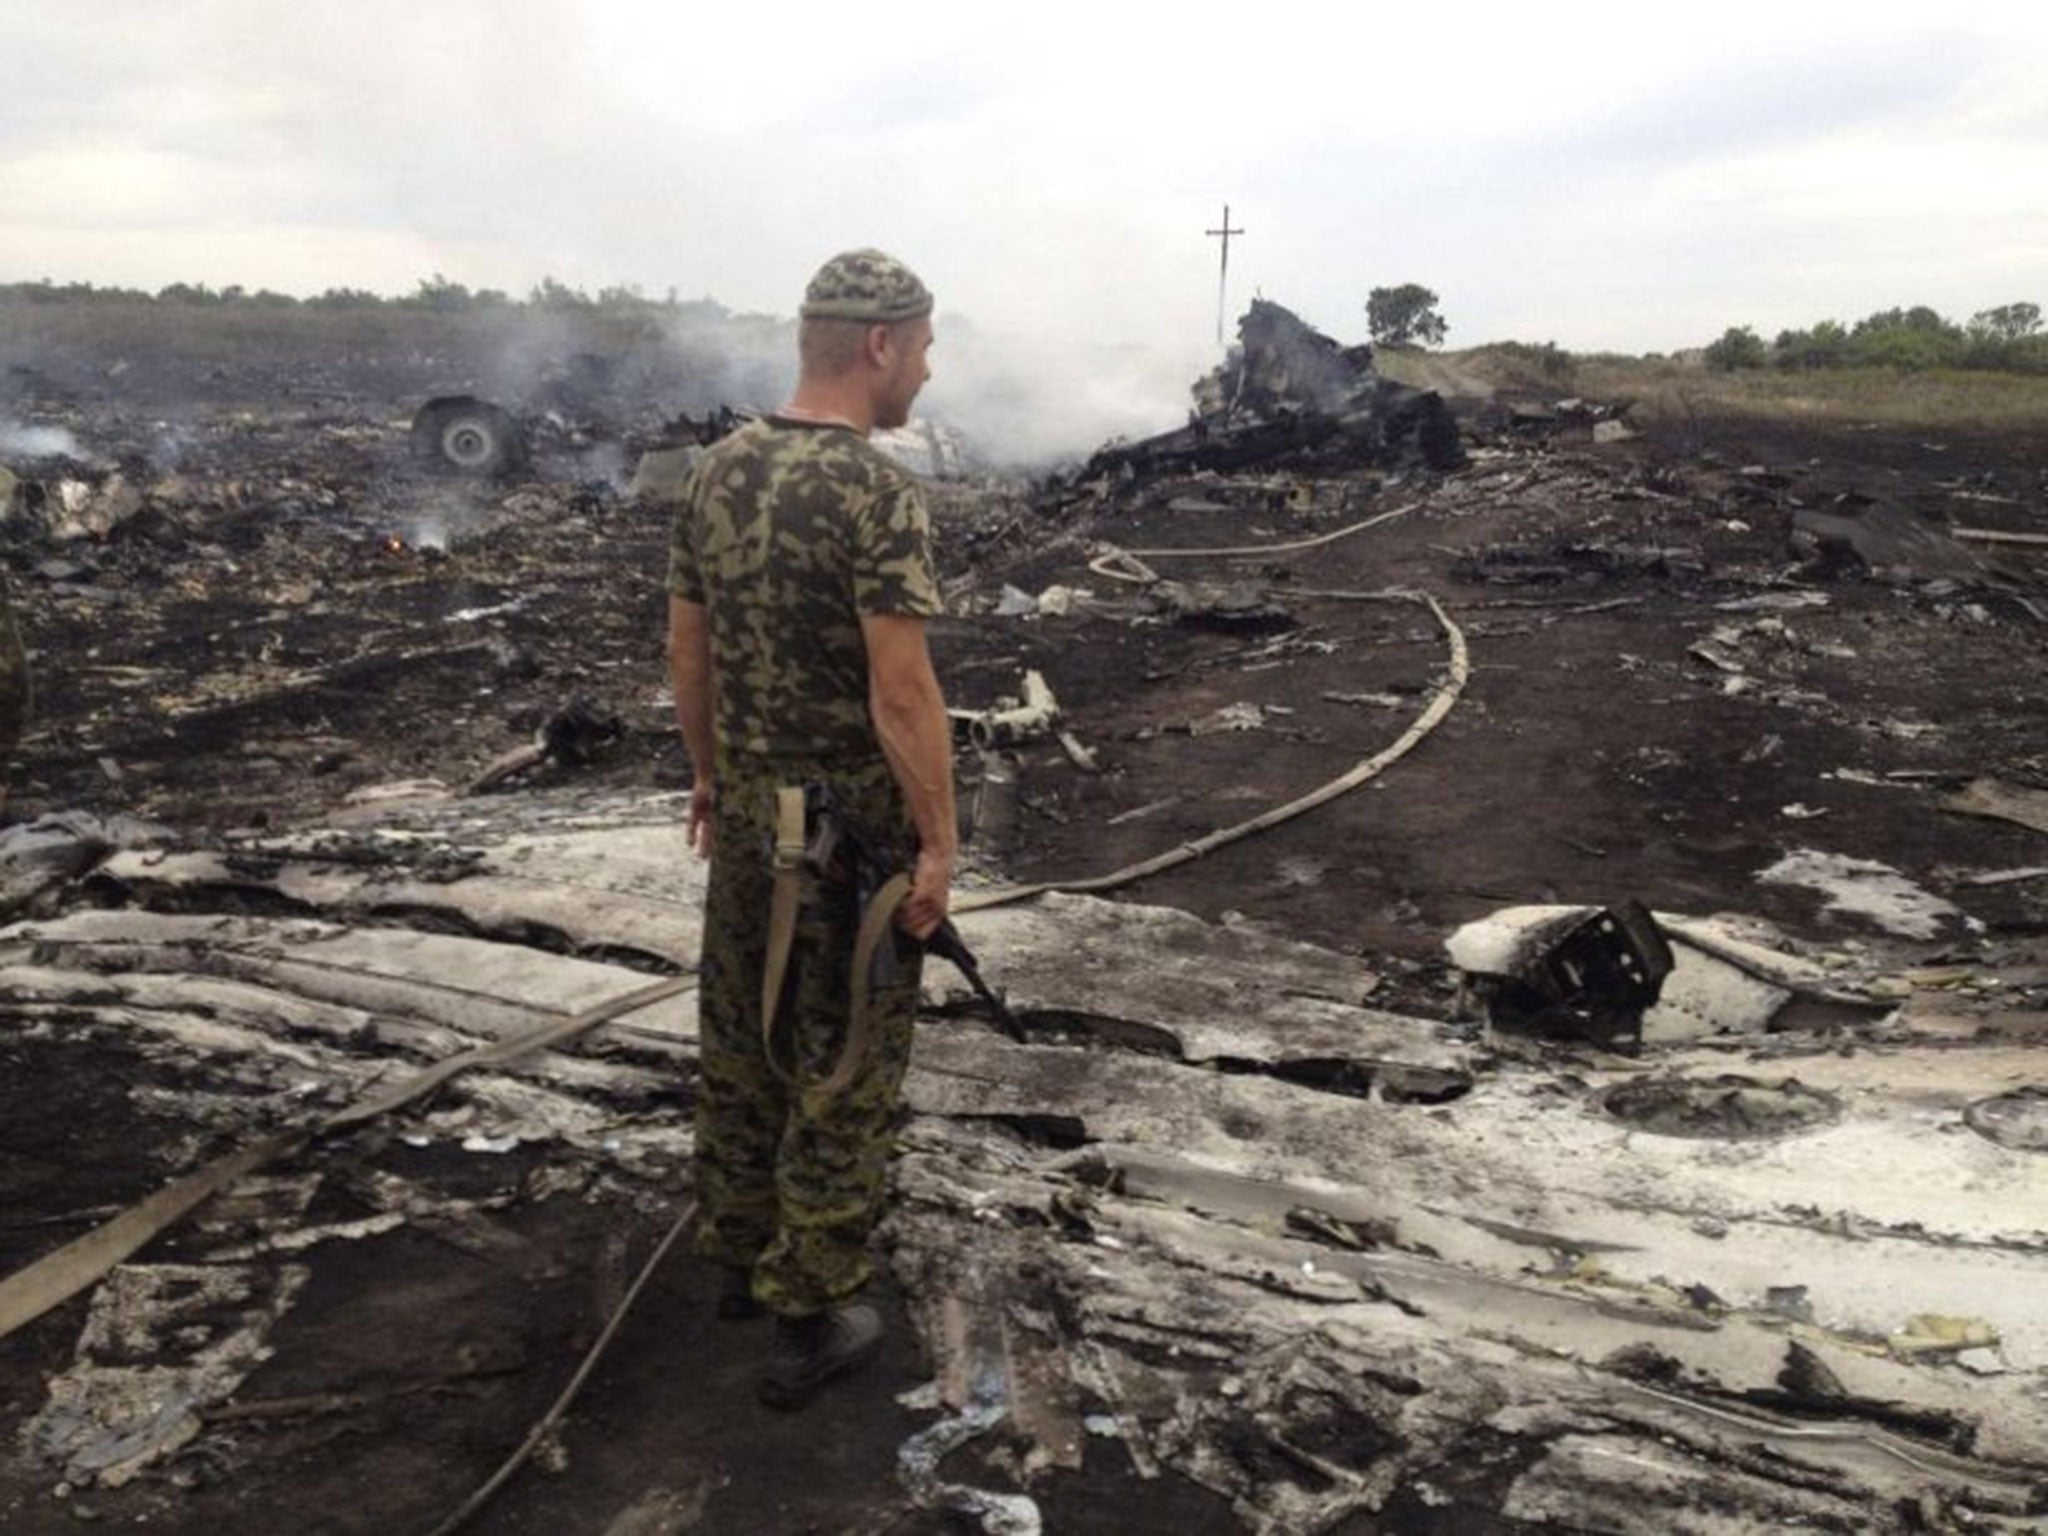 An armed pro-Russian separatist stands at a site of a Malaysia Airlines Boeing 777 plane crash in the settlement of Grabovo in the Donetsk region of Ukraine